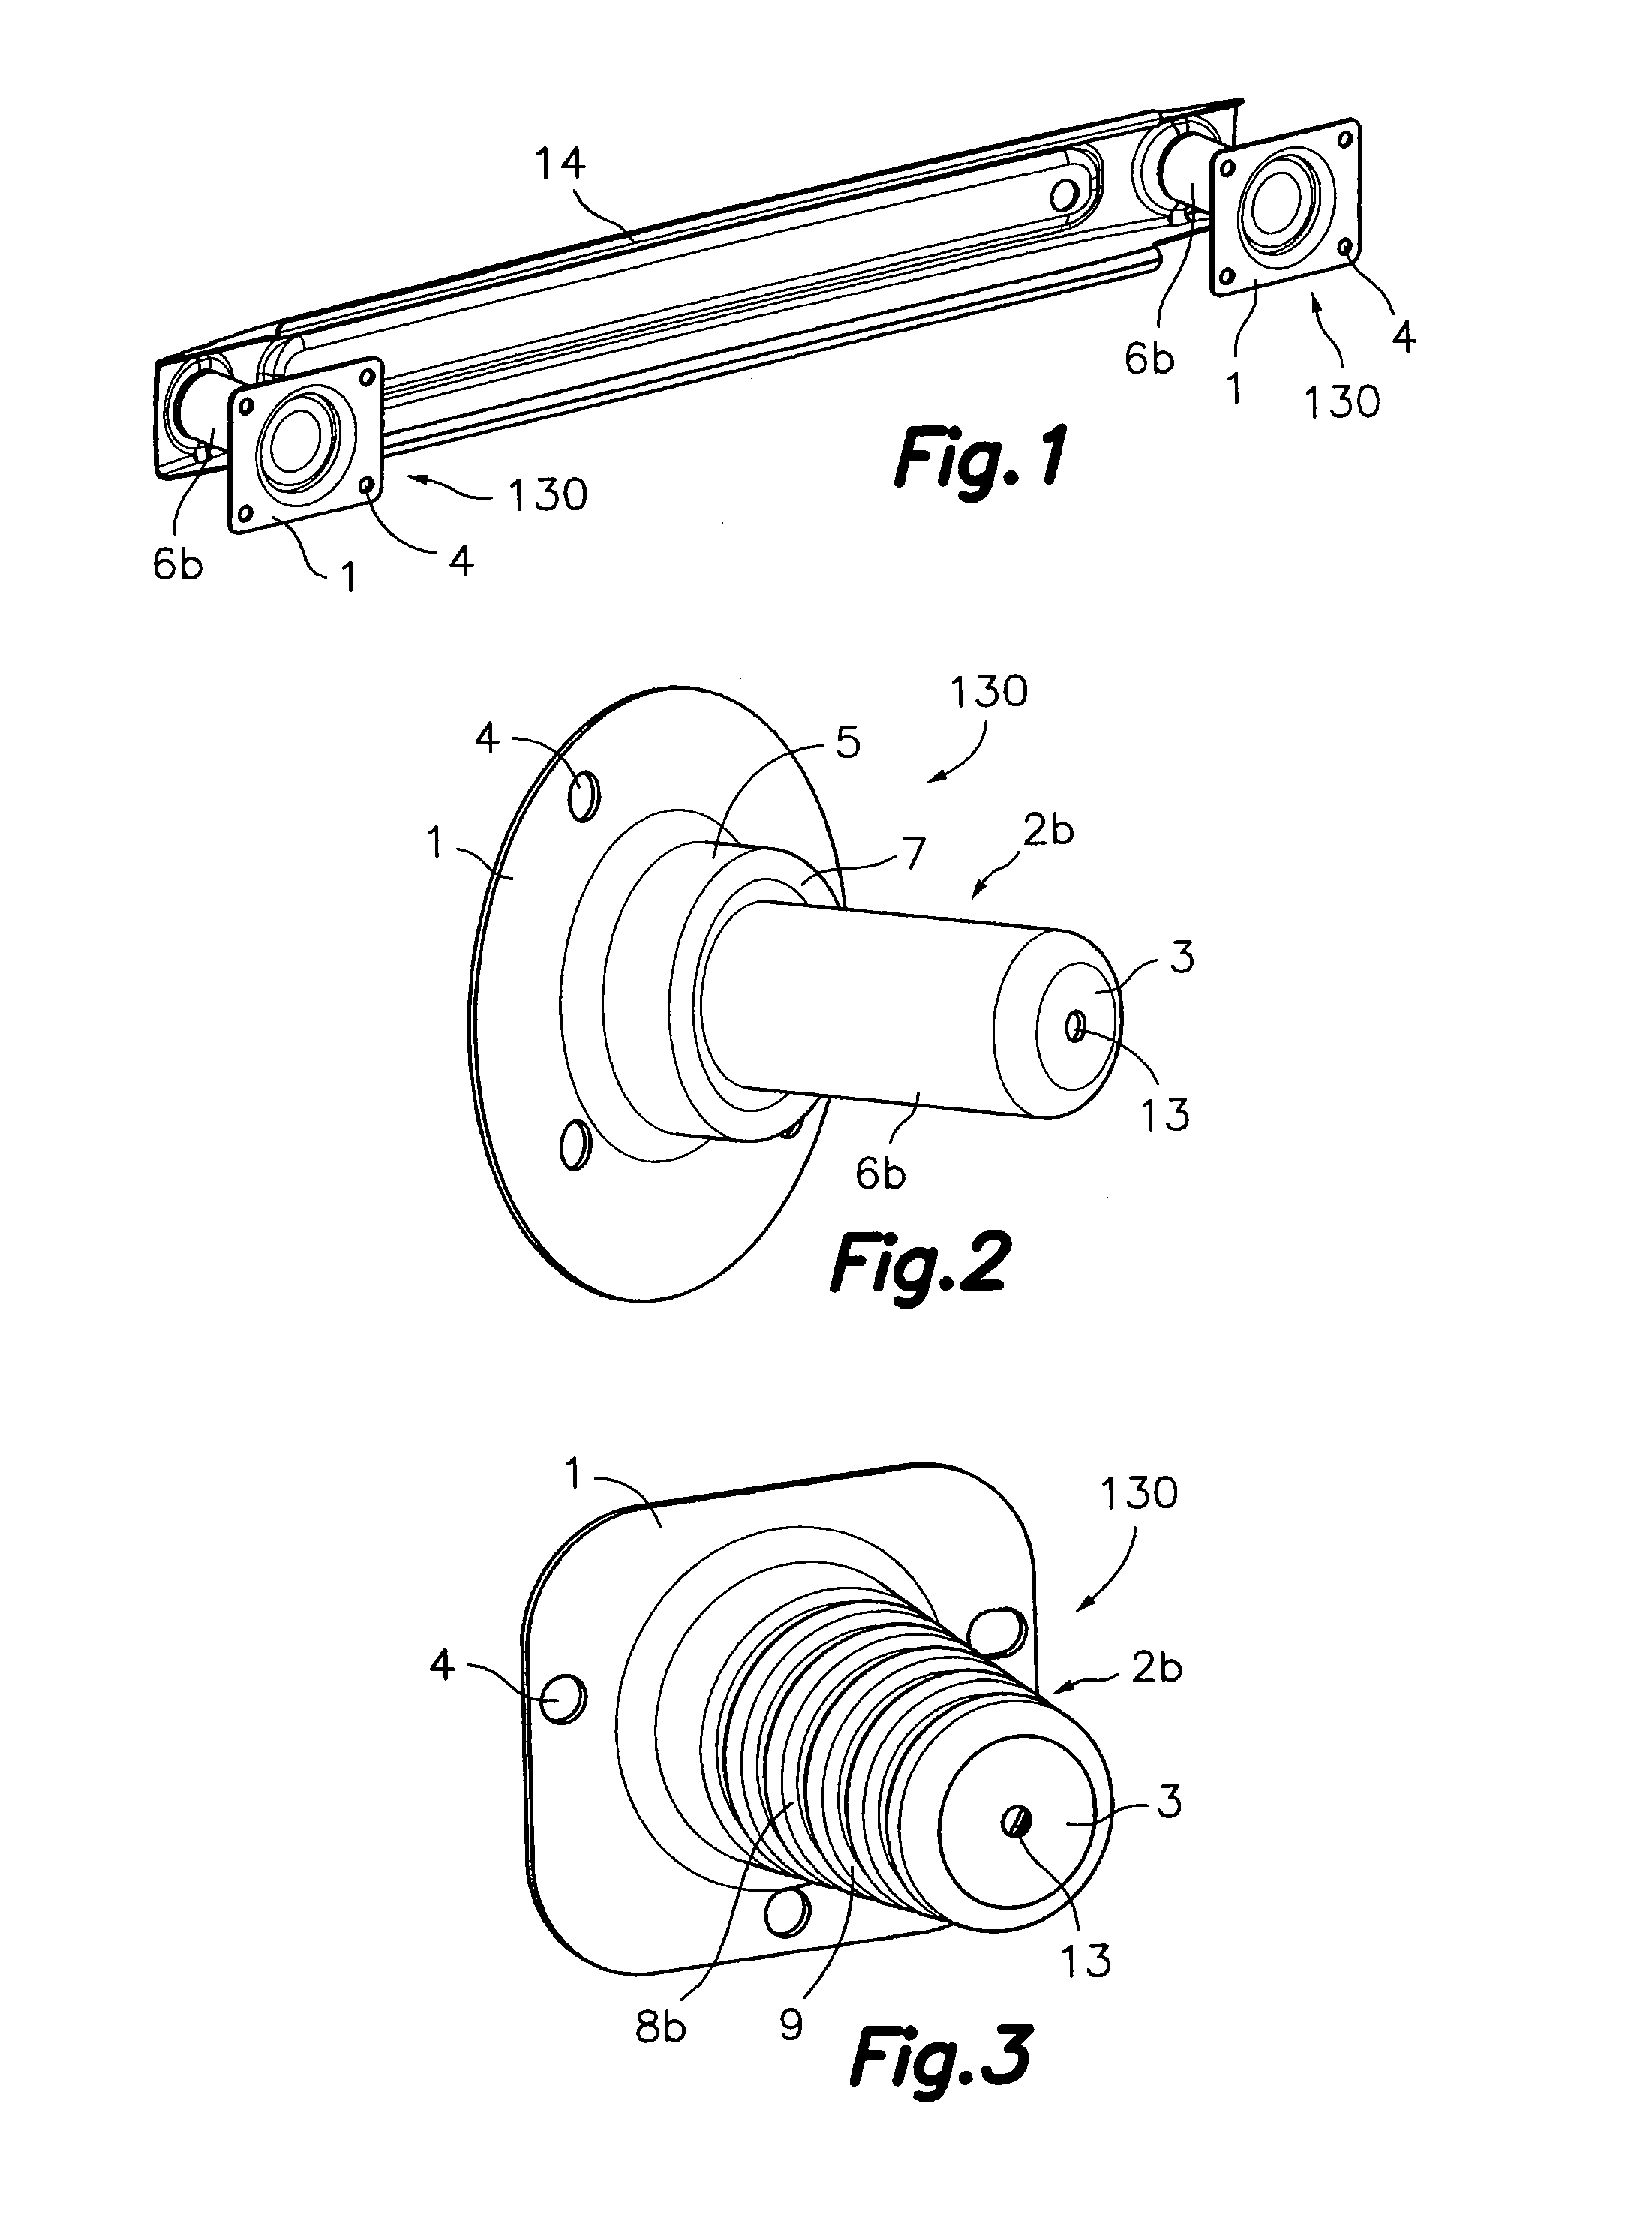 Method for producing a shock absorber and shock absorber thus obtained